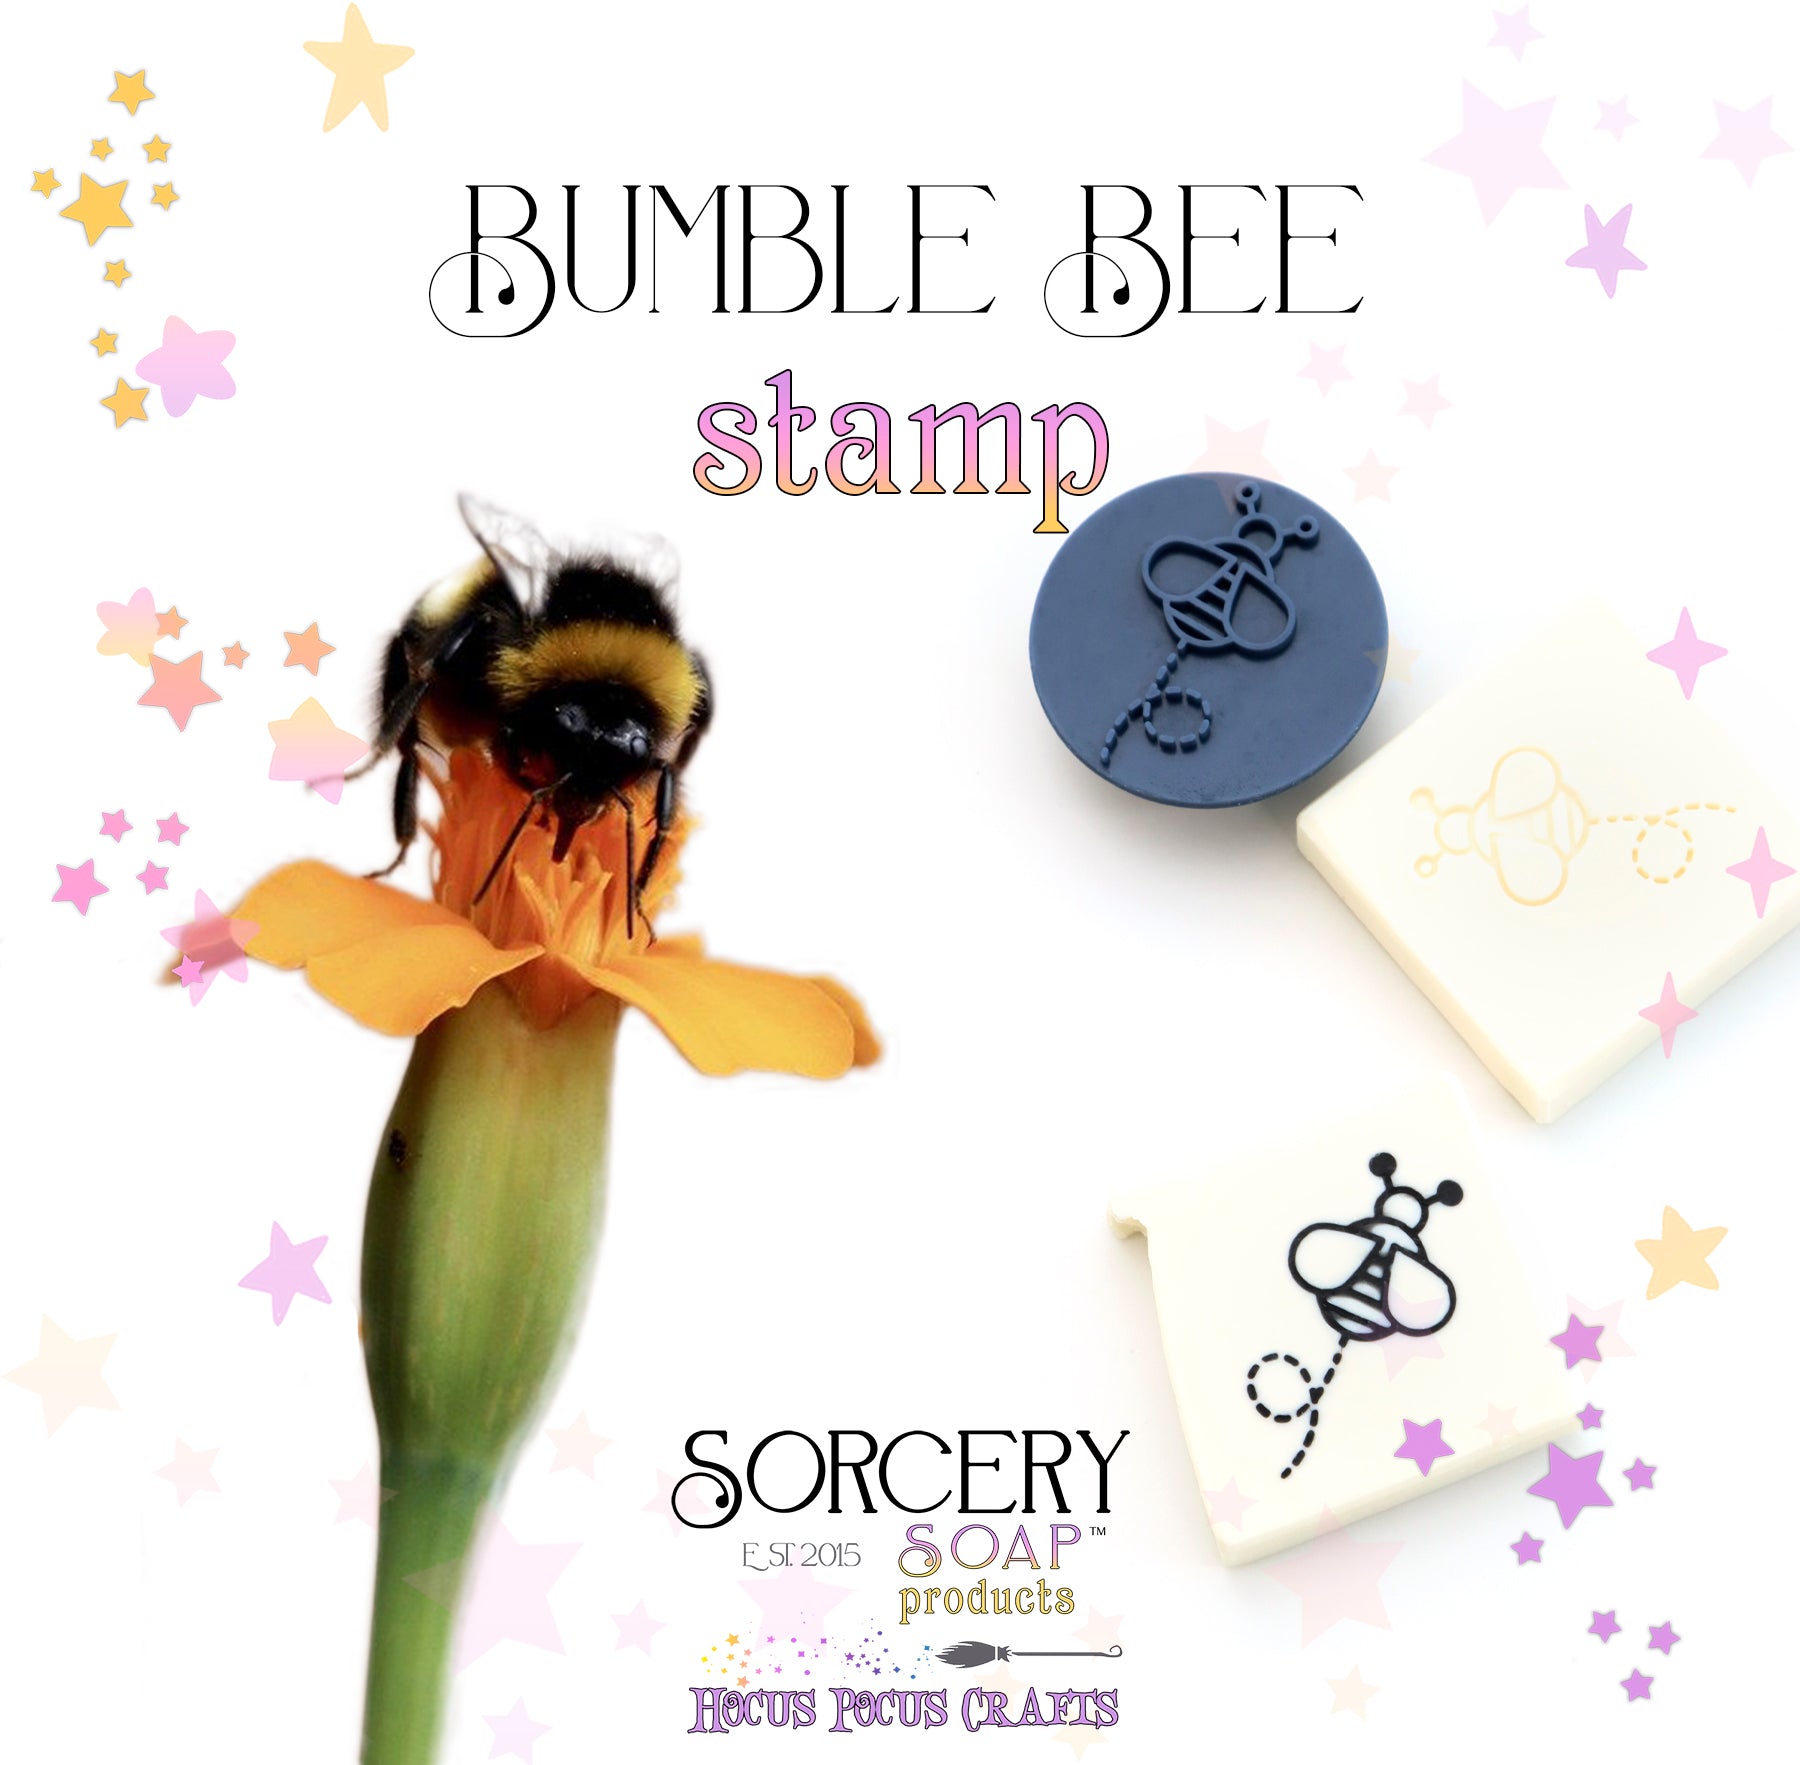 Bumble Bee Stamp